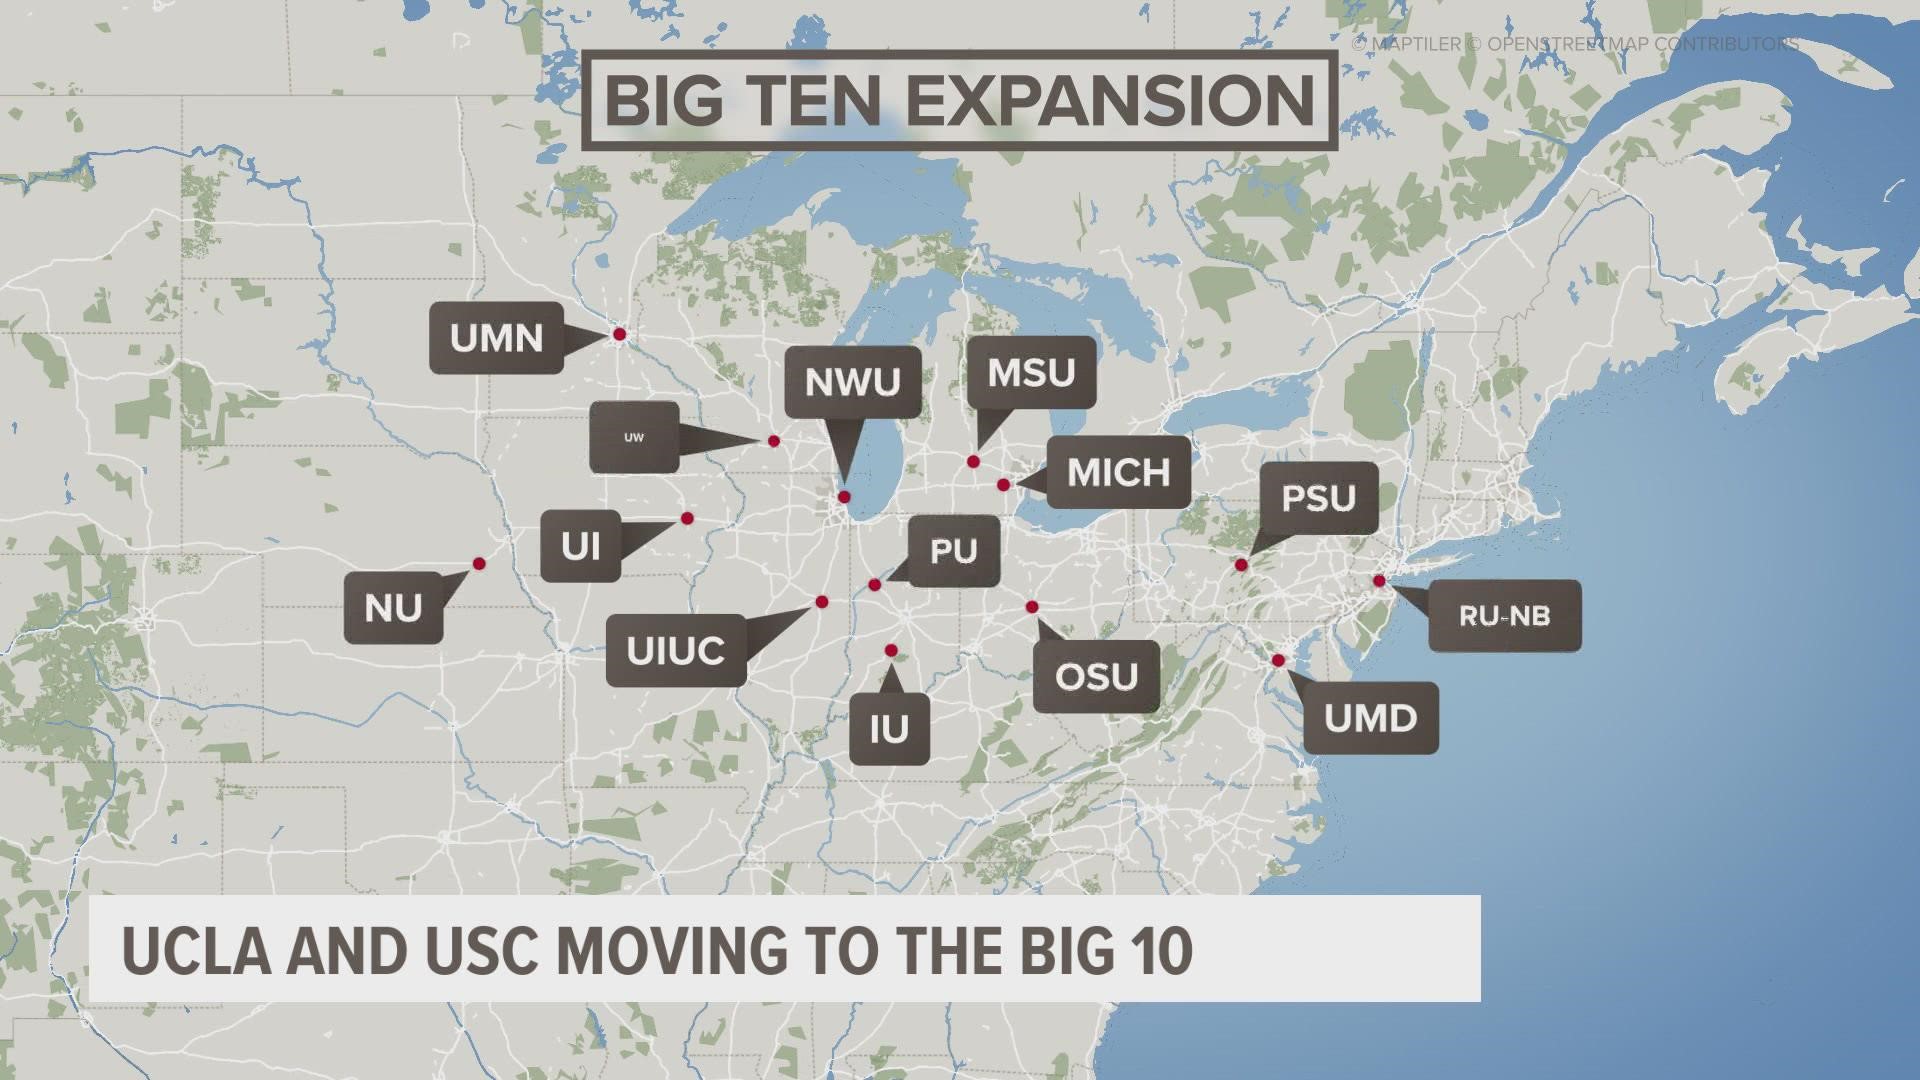 The Big Ten chancellors and presidents voted unanimously to accept the schools. The move puts the conference at 16 schools.